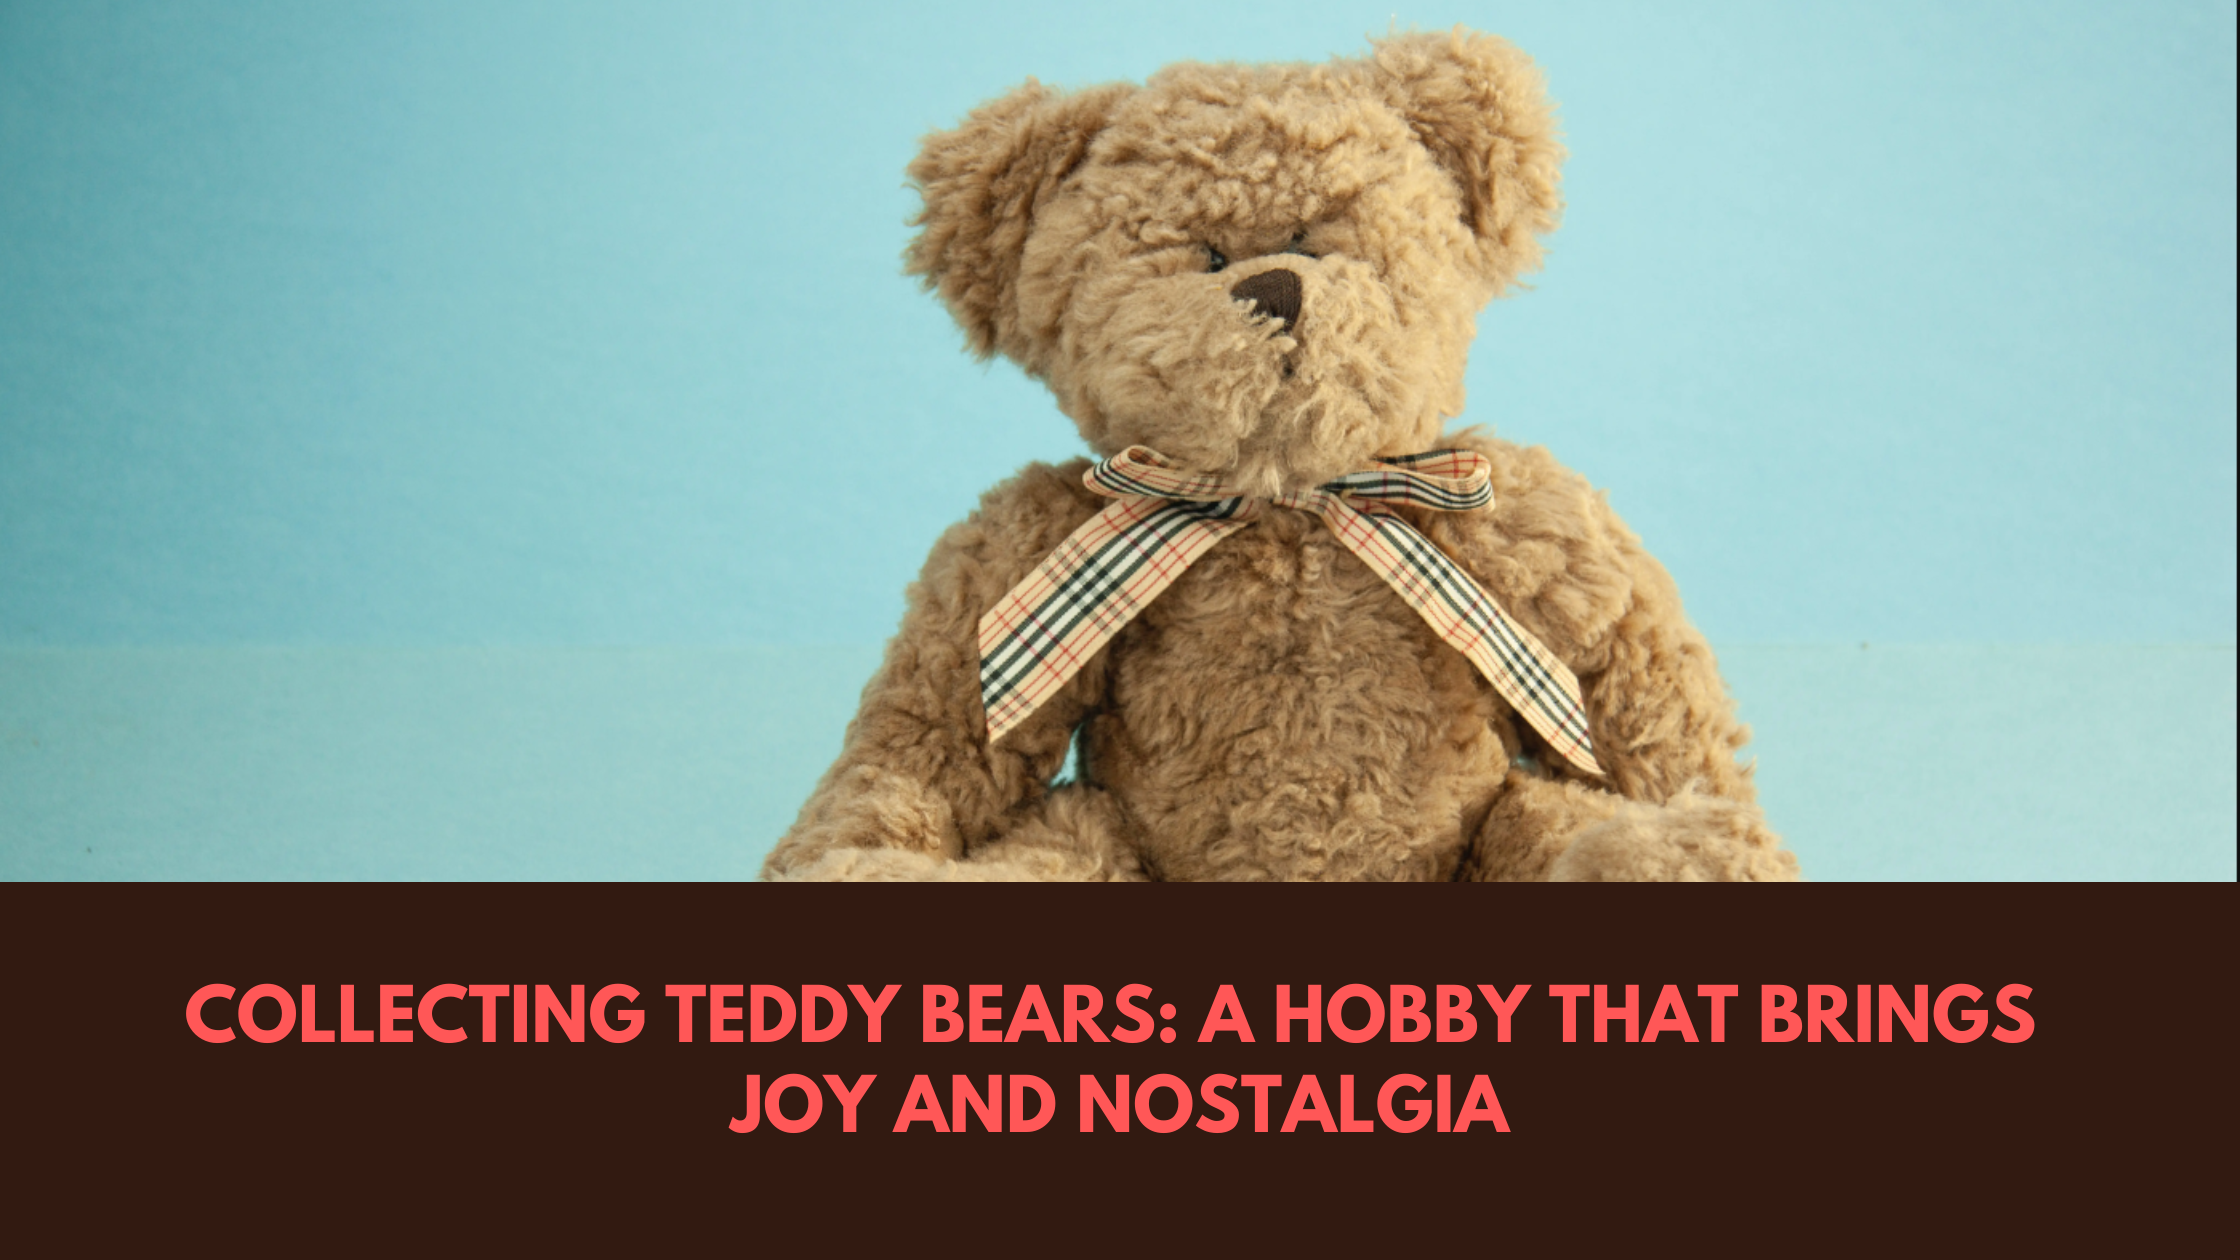 Collecting Teddy Bears: A Hobby That Brings Joy and Nostalgia